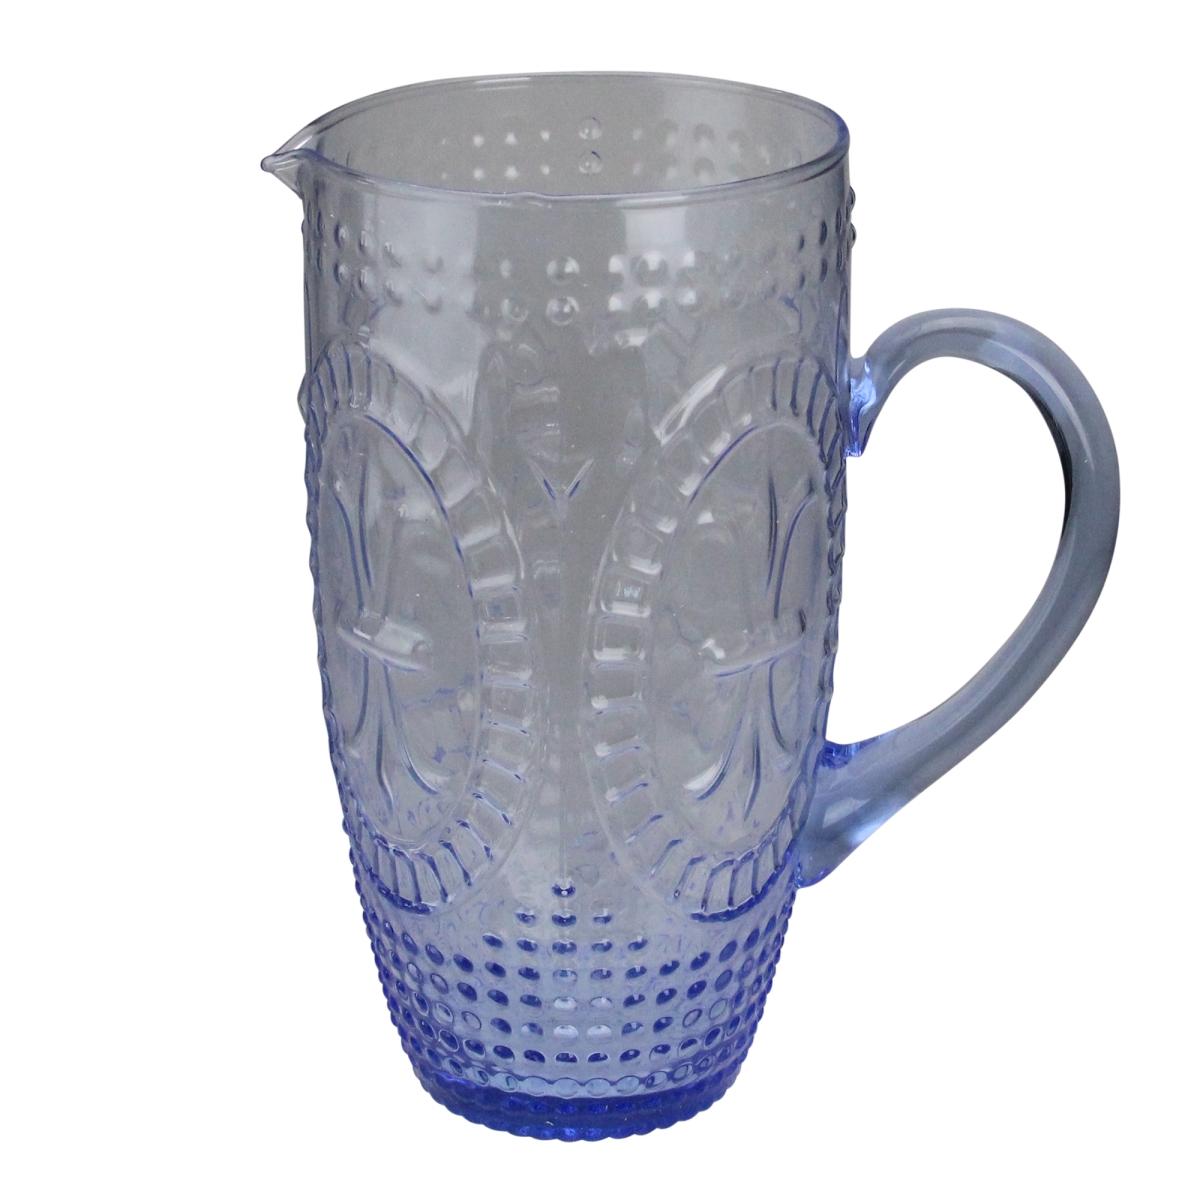 Picture of Avon 33537601 8.75 in. Textured Glass Beverage Pitcher - Blue